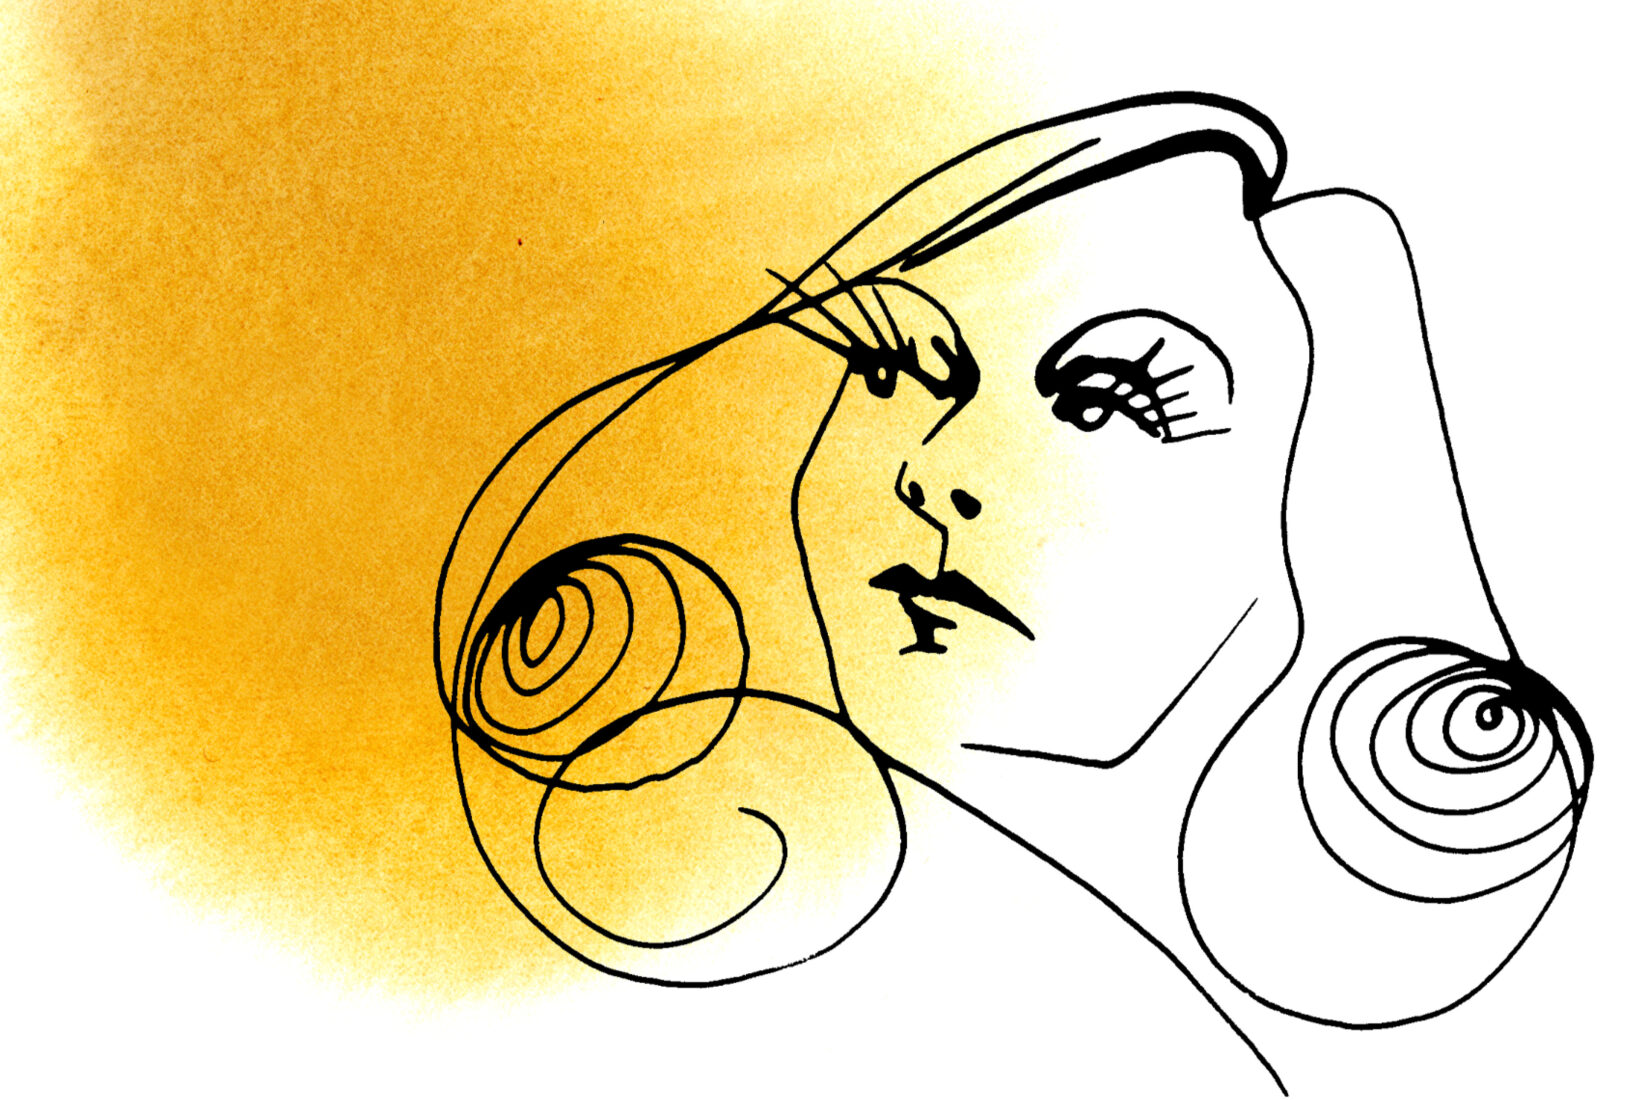 Drawing with a black pencil of Greta Garbo's face with a touch of yellow color.